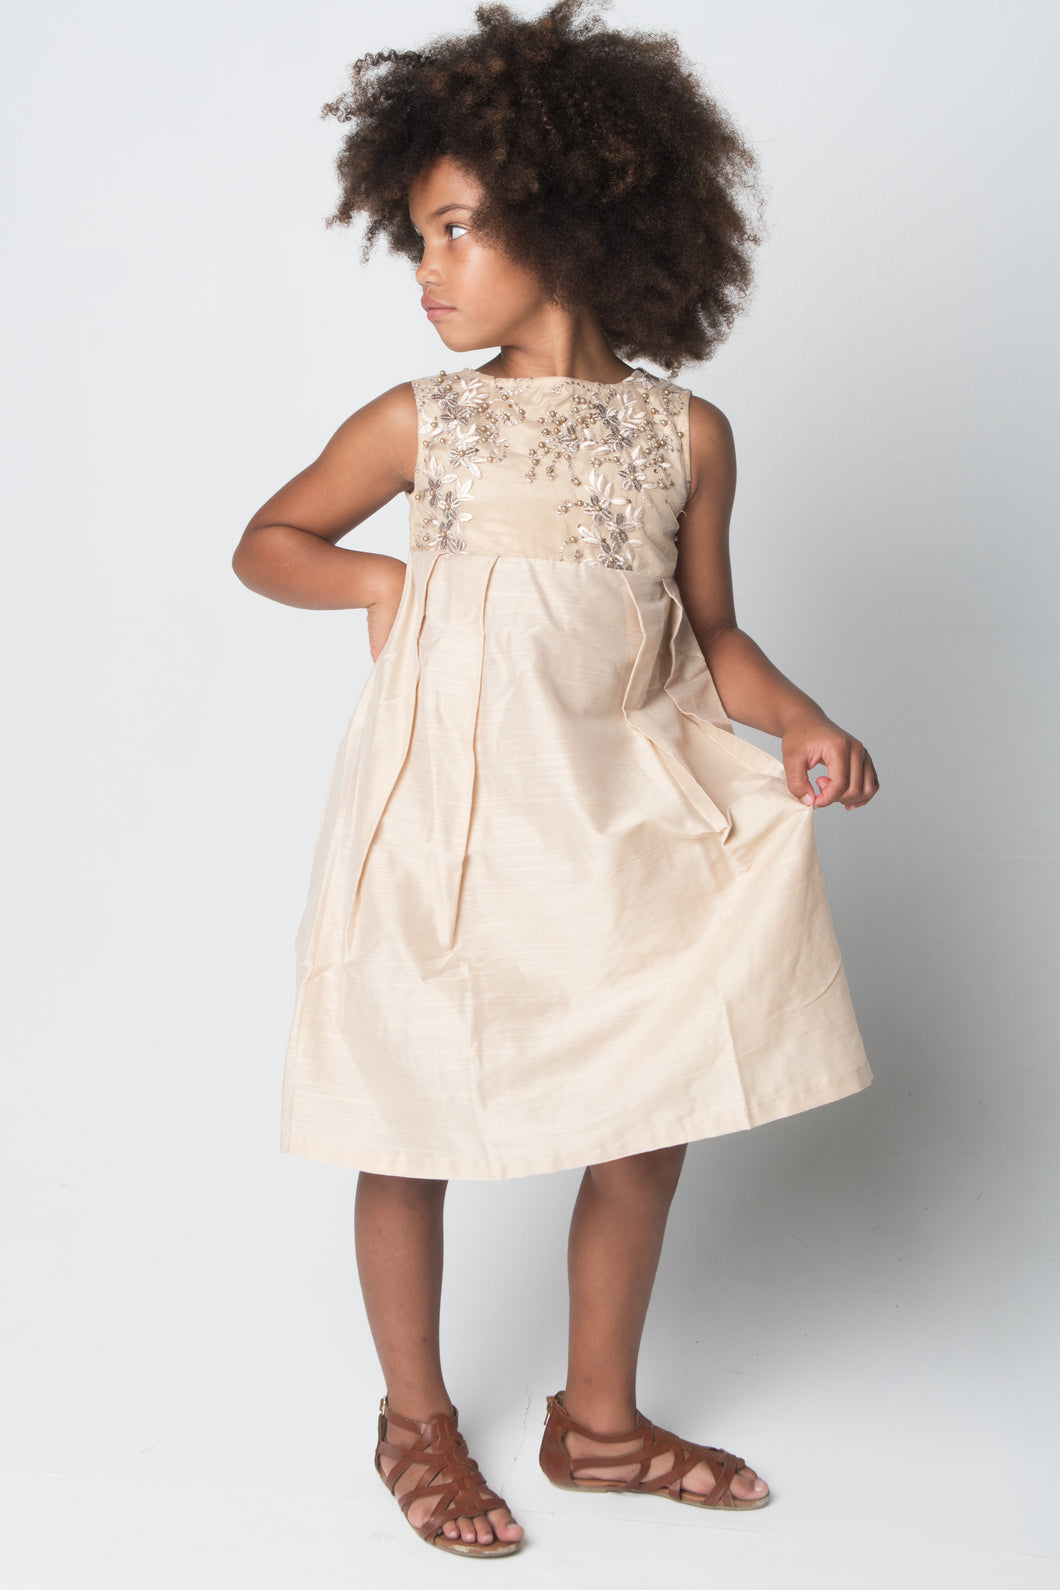 Cream And Silver Embroidered Shift Dress - Kids Wholesale Boutique Clothing, Dress - Girls Dresses, Yo Baby Wholesale - Yo Baby